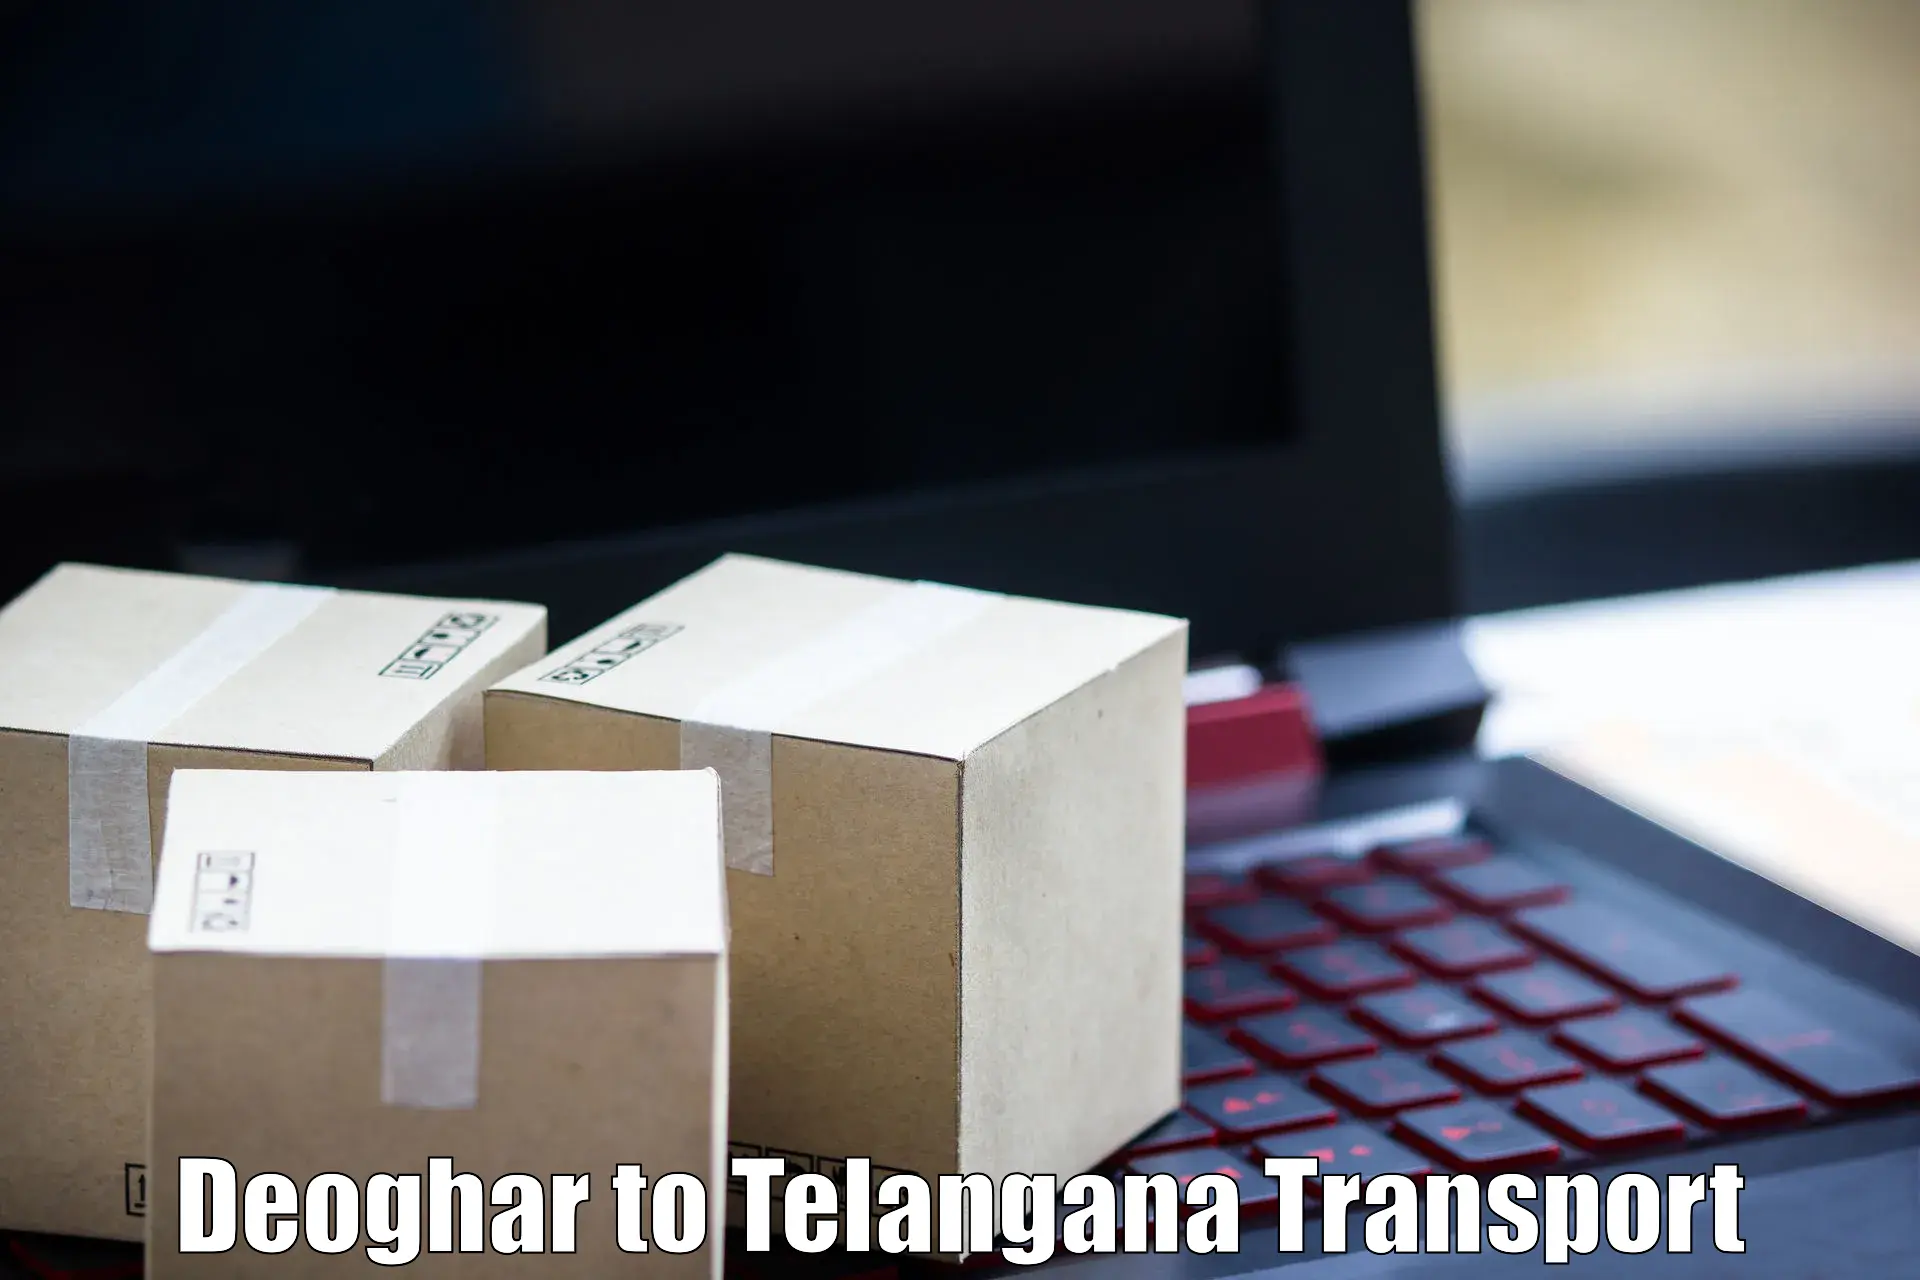 Truck transport companies in India Deoghar to Wyra